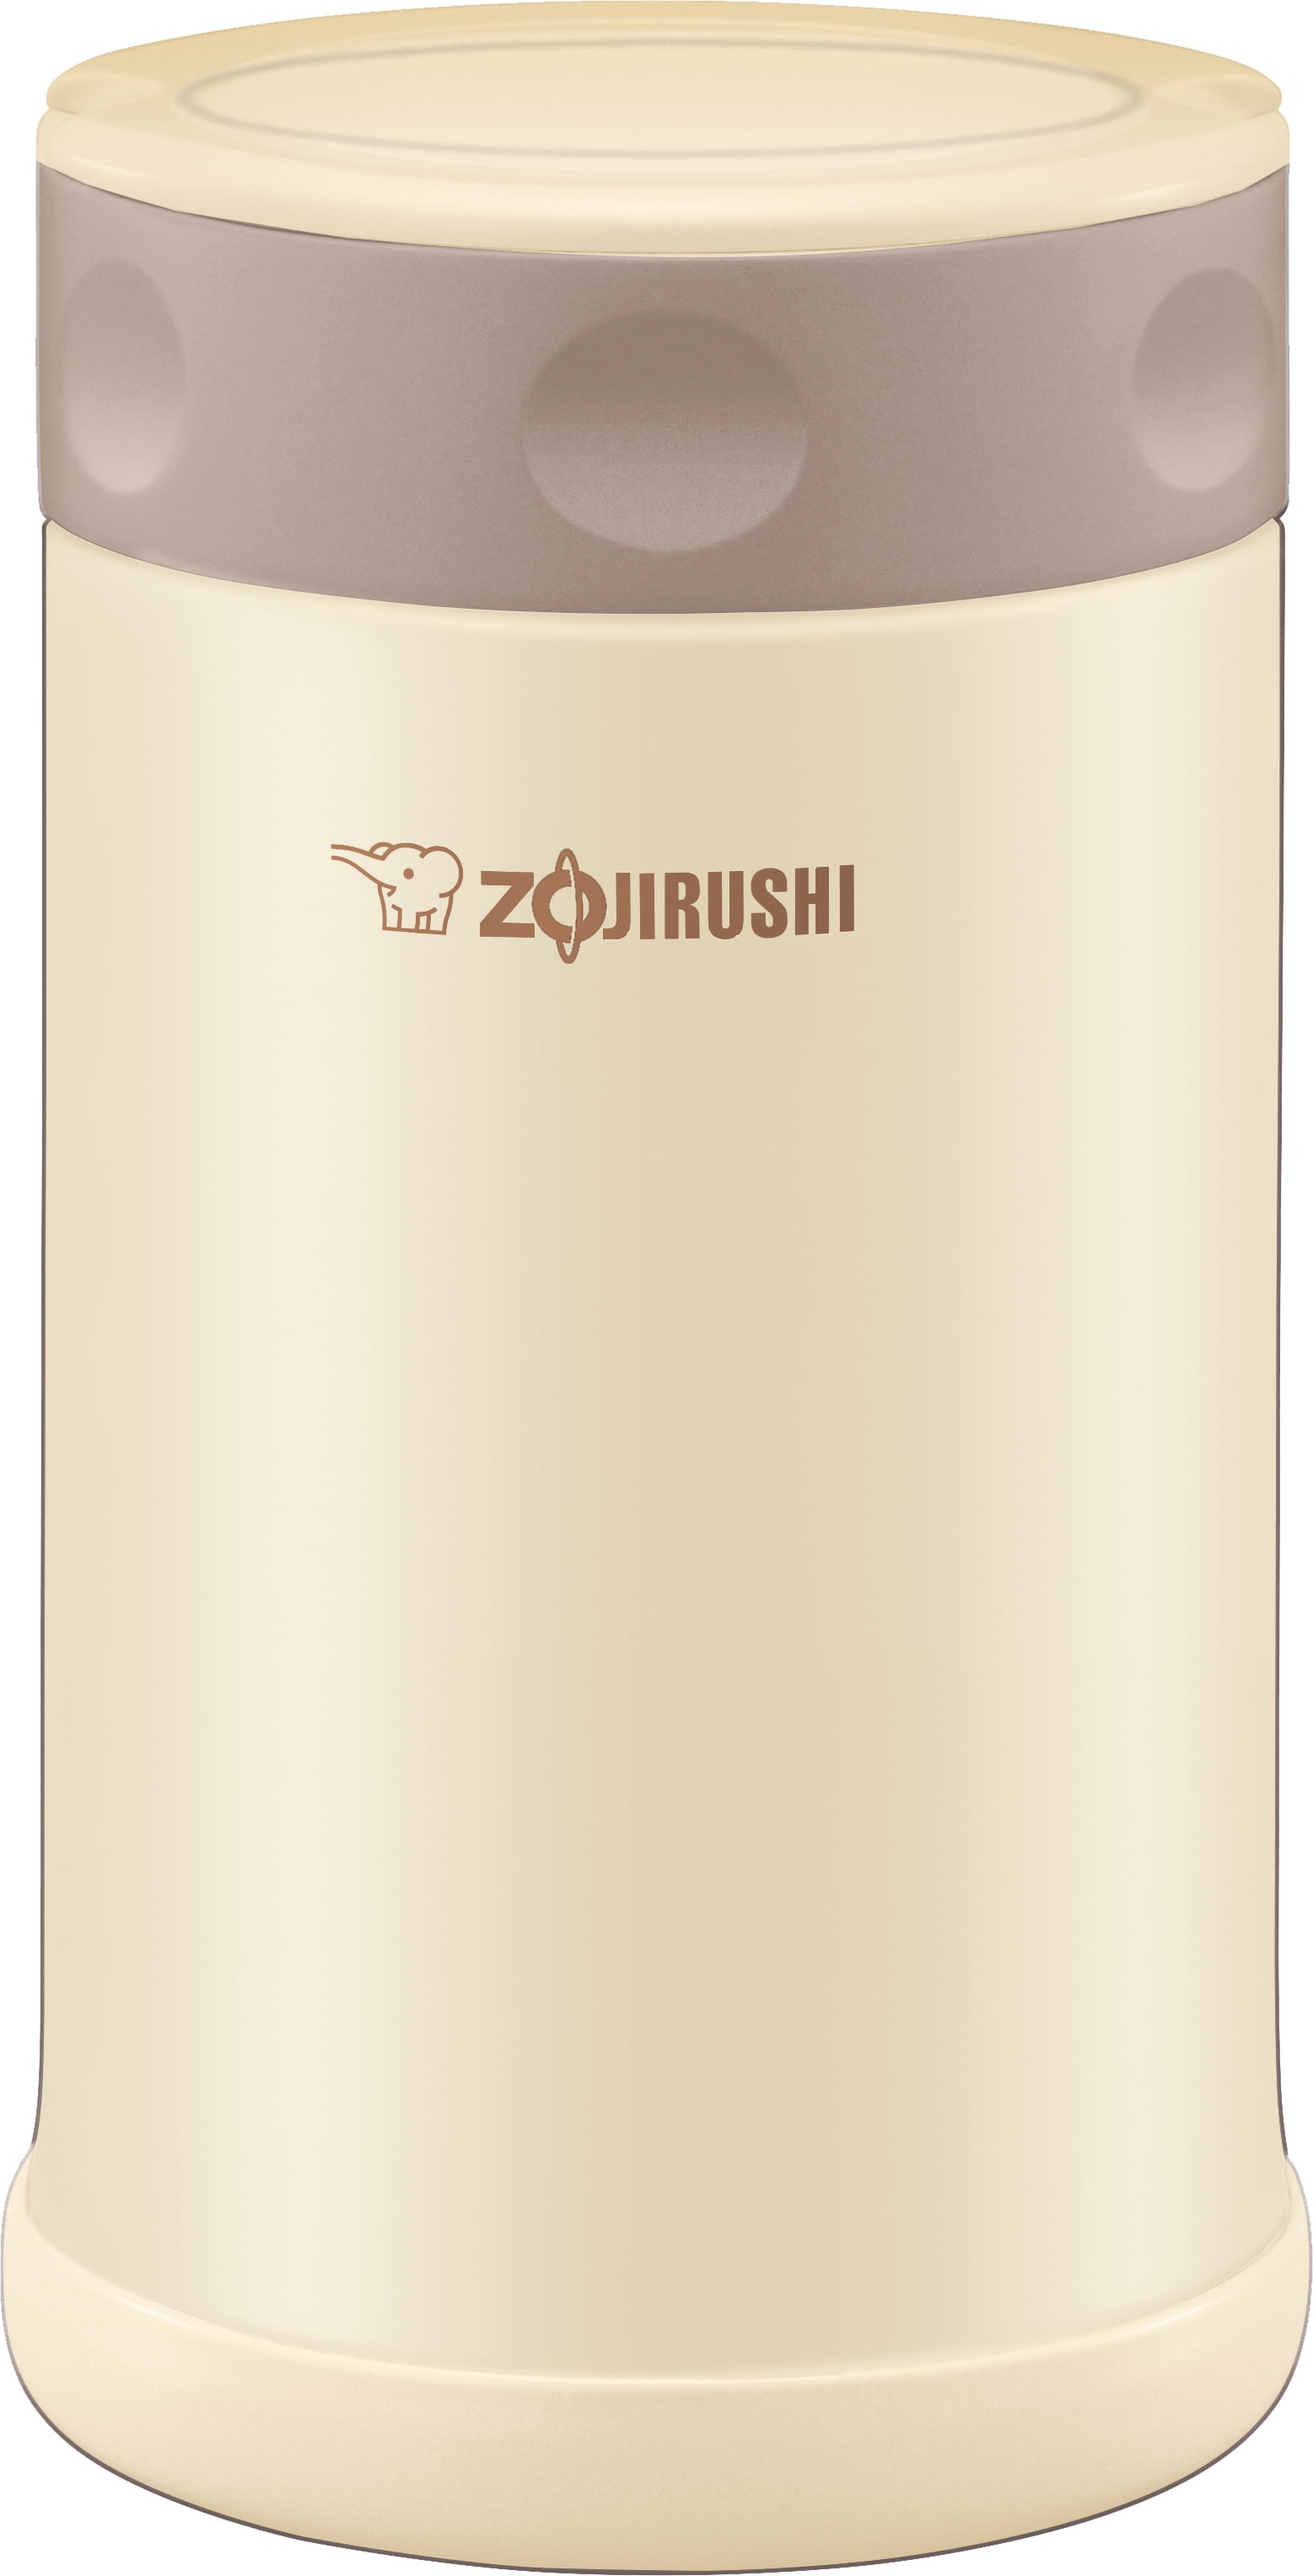  Zojirushi Steel Food Jar, 11.8-Ounce, Black/Stainless: Home &  Kitchen